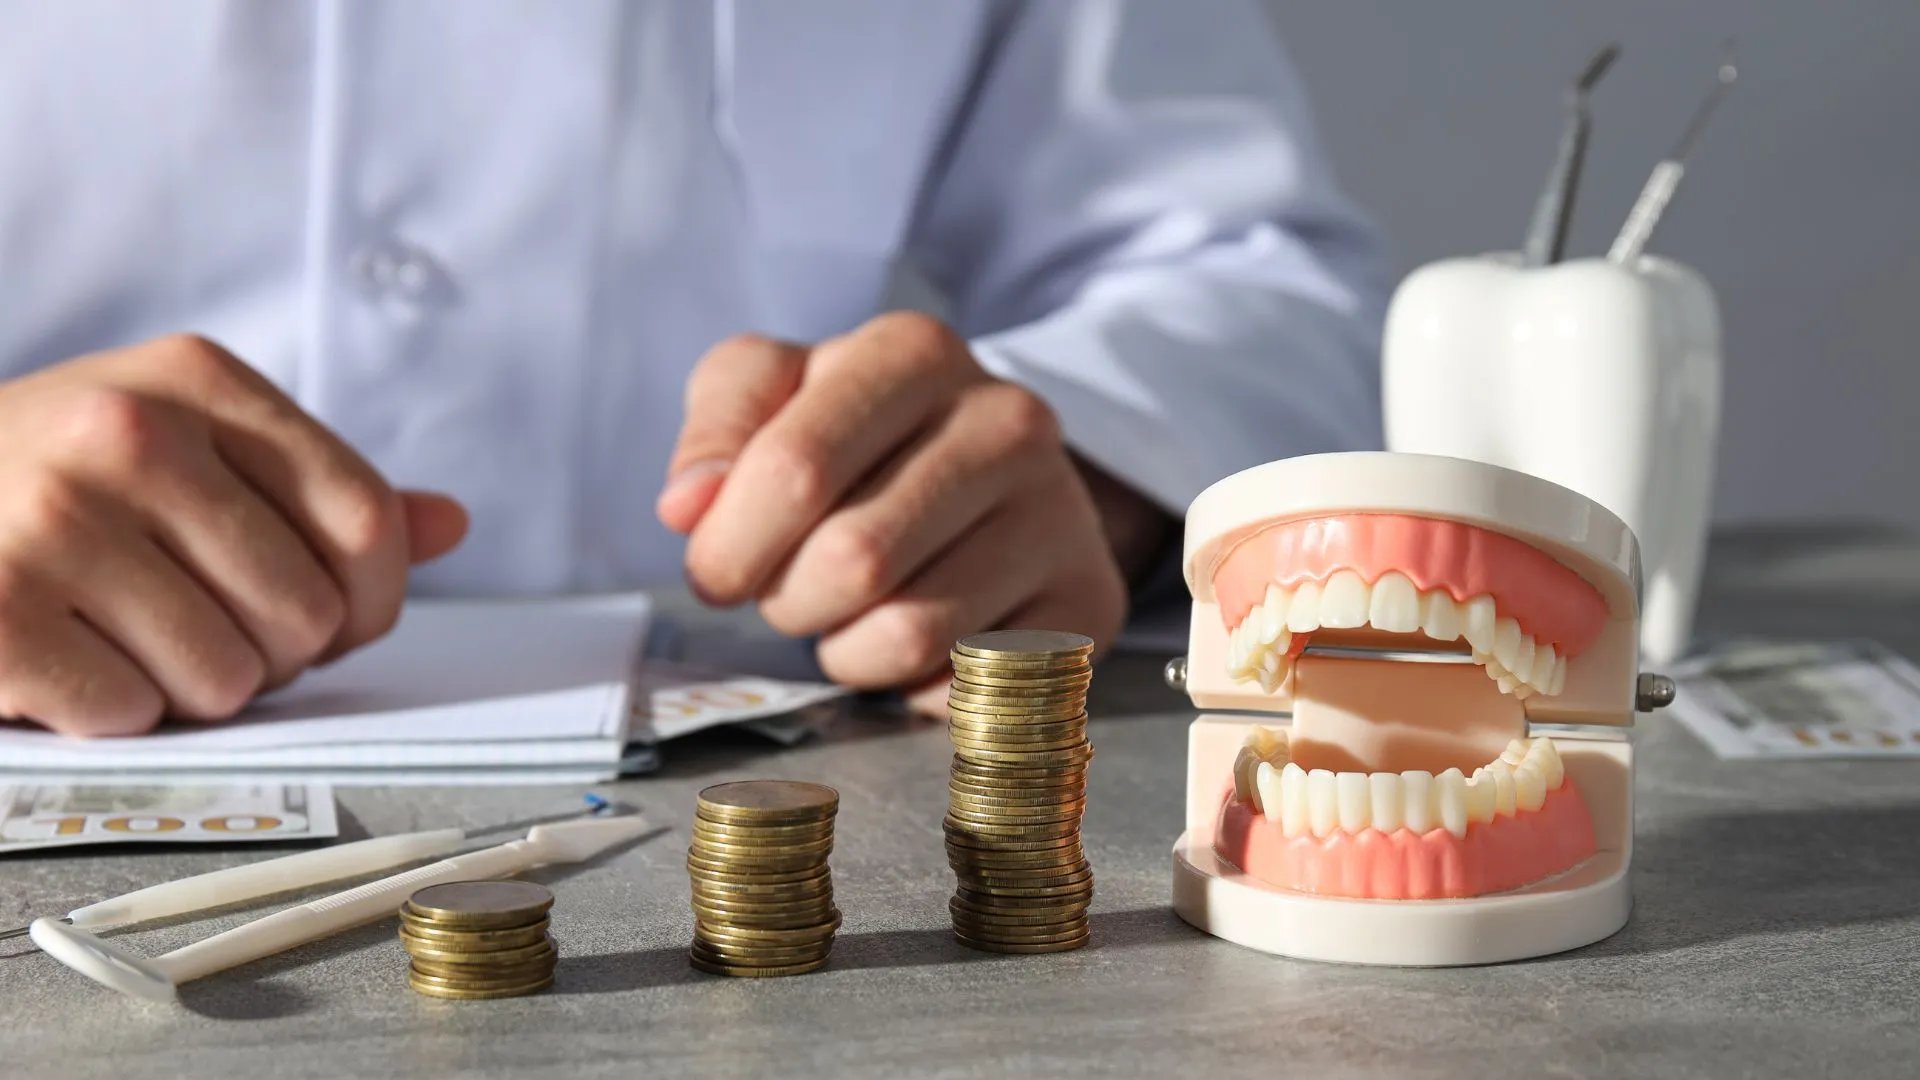 Evaluating the Cost of Dental Implants